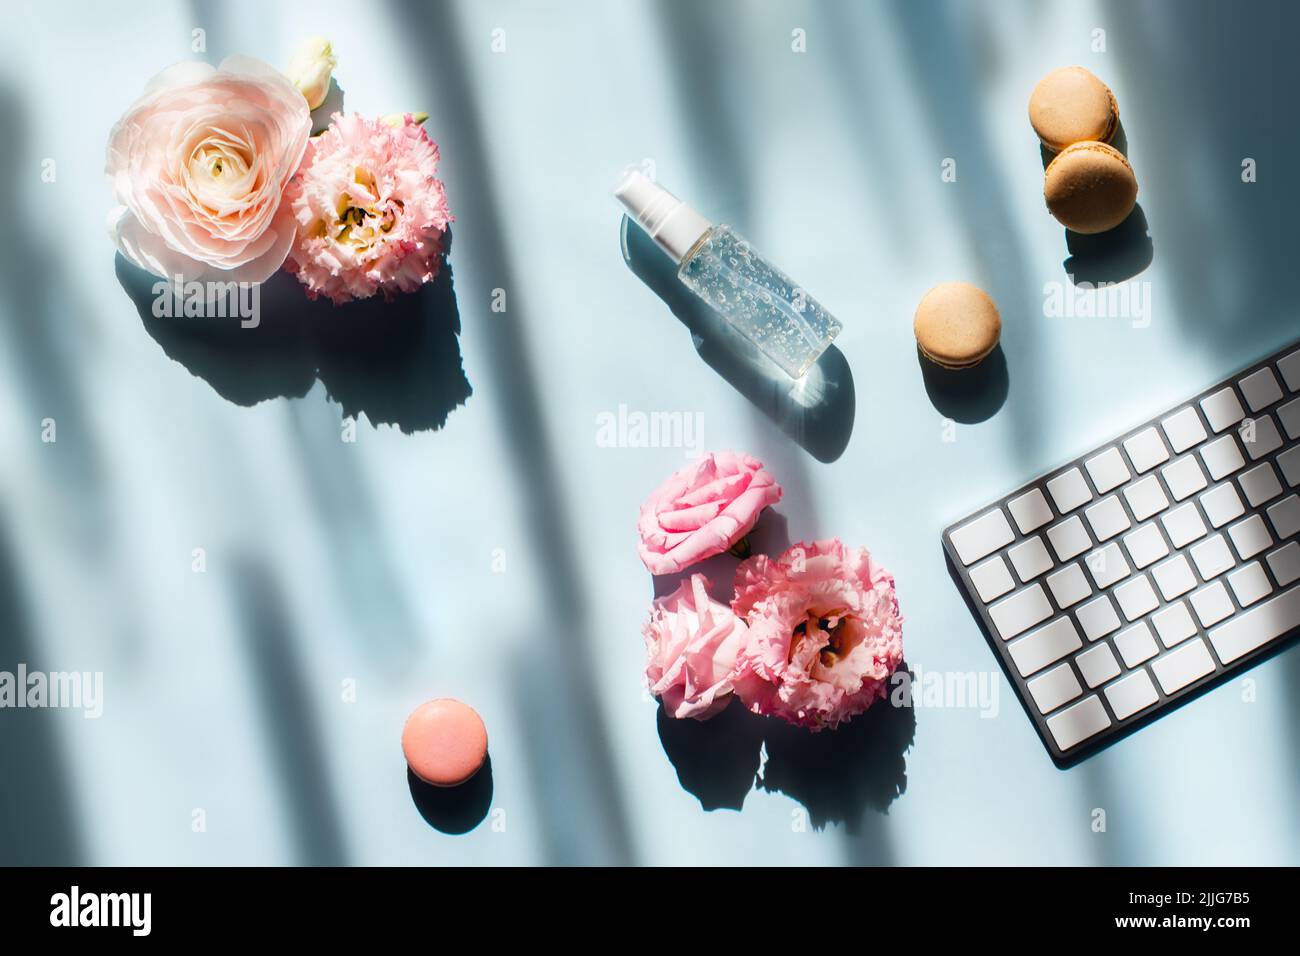 Workspace in sunlight. Computer keyboard, next to window, hand cream or sanitizer, cakes and flowers. Stock Photo